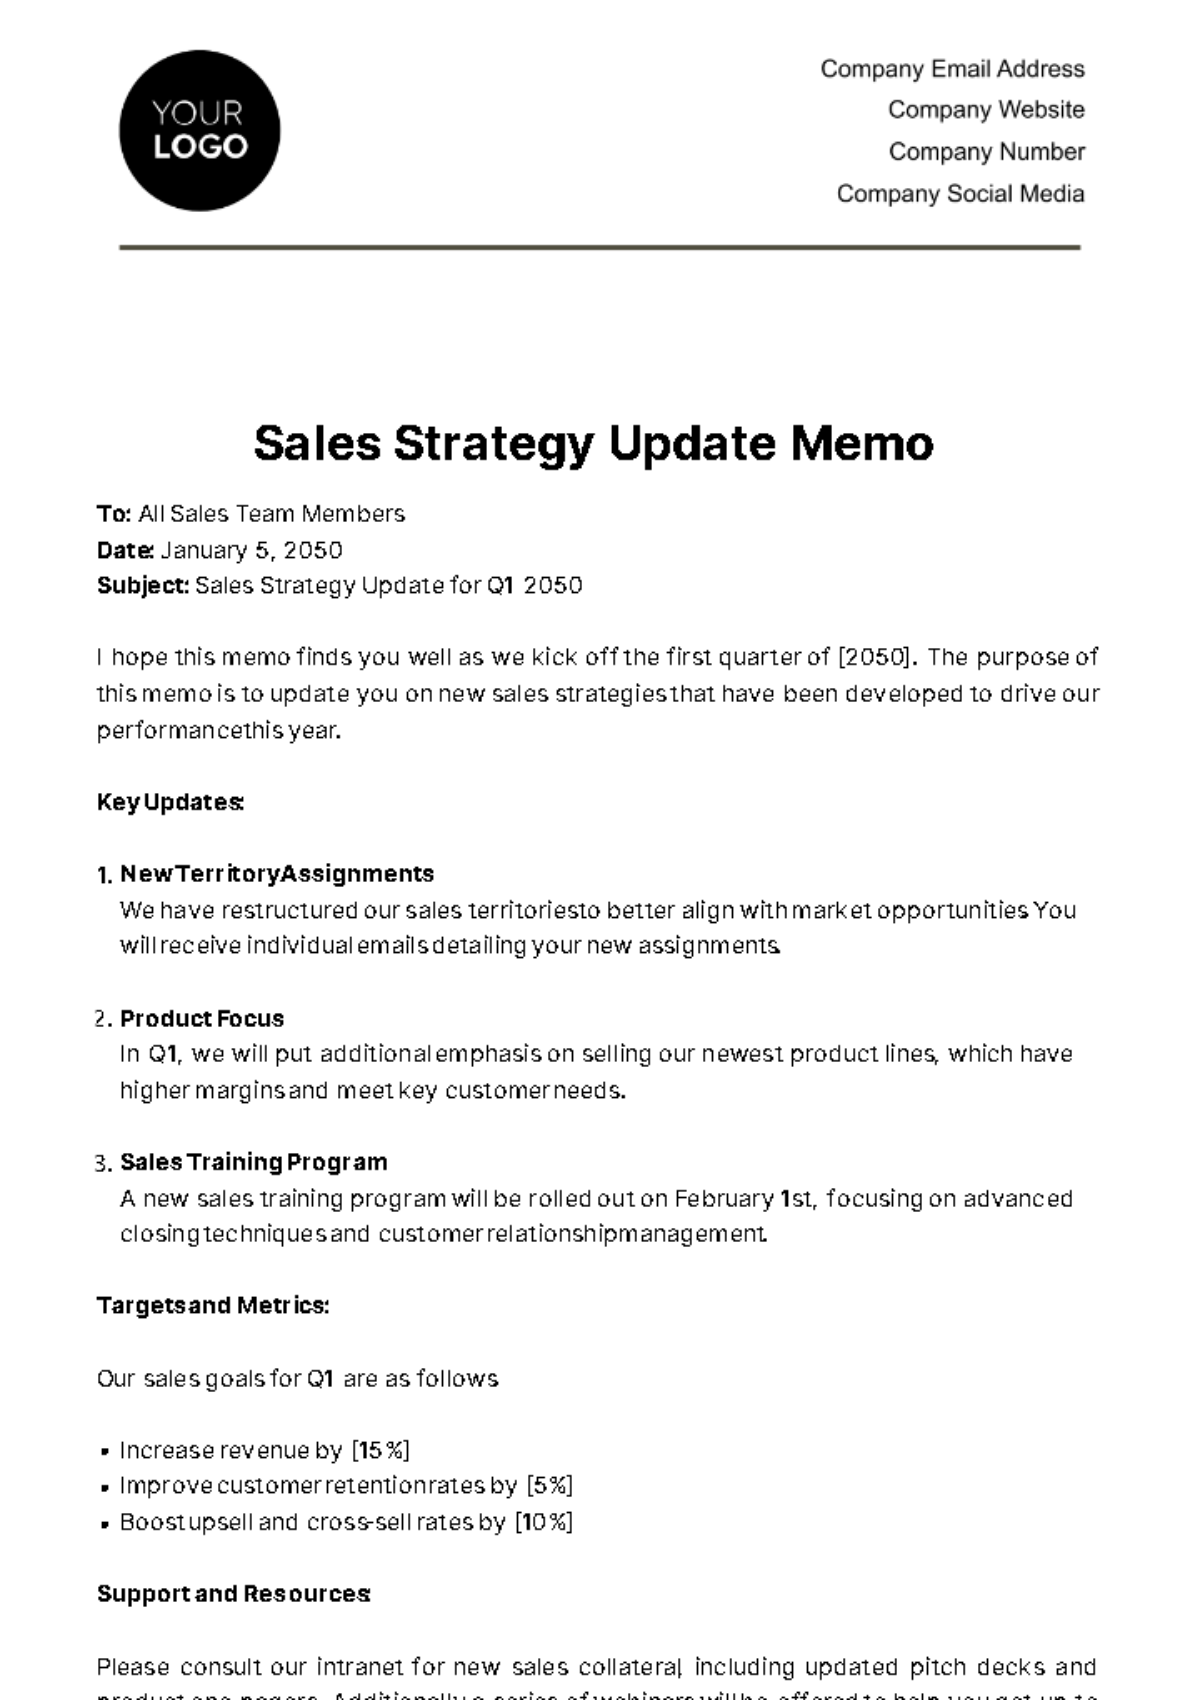 Sales Strategy Update Memo Template